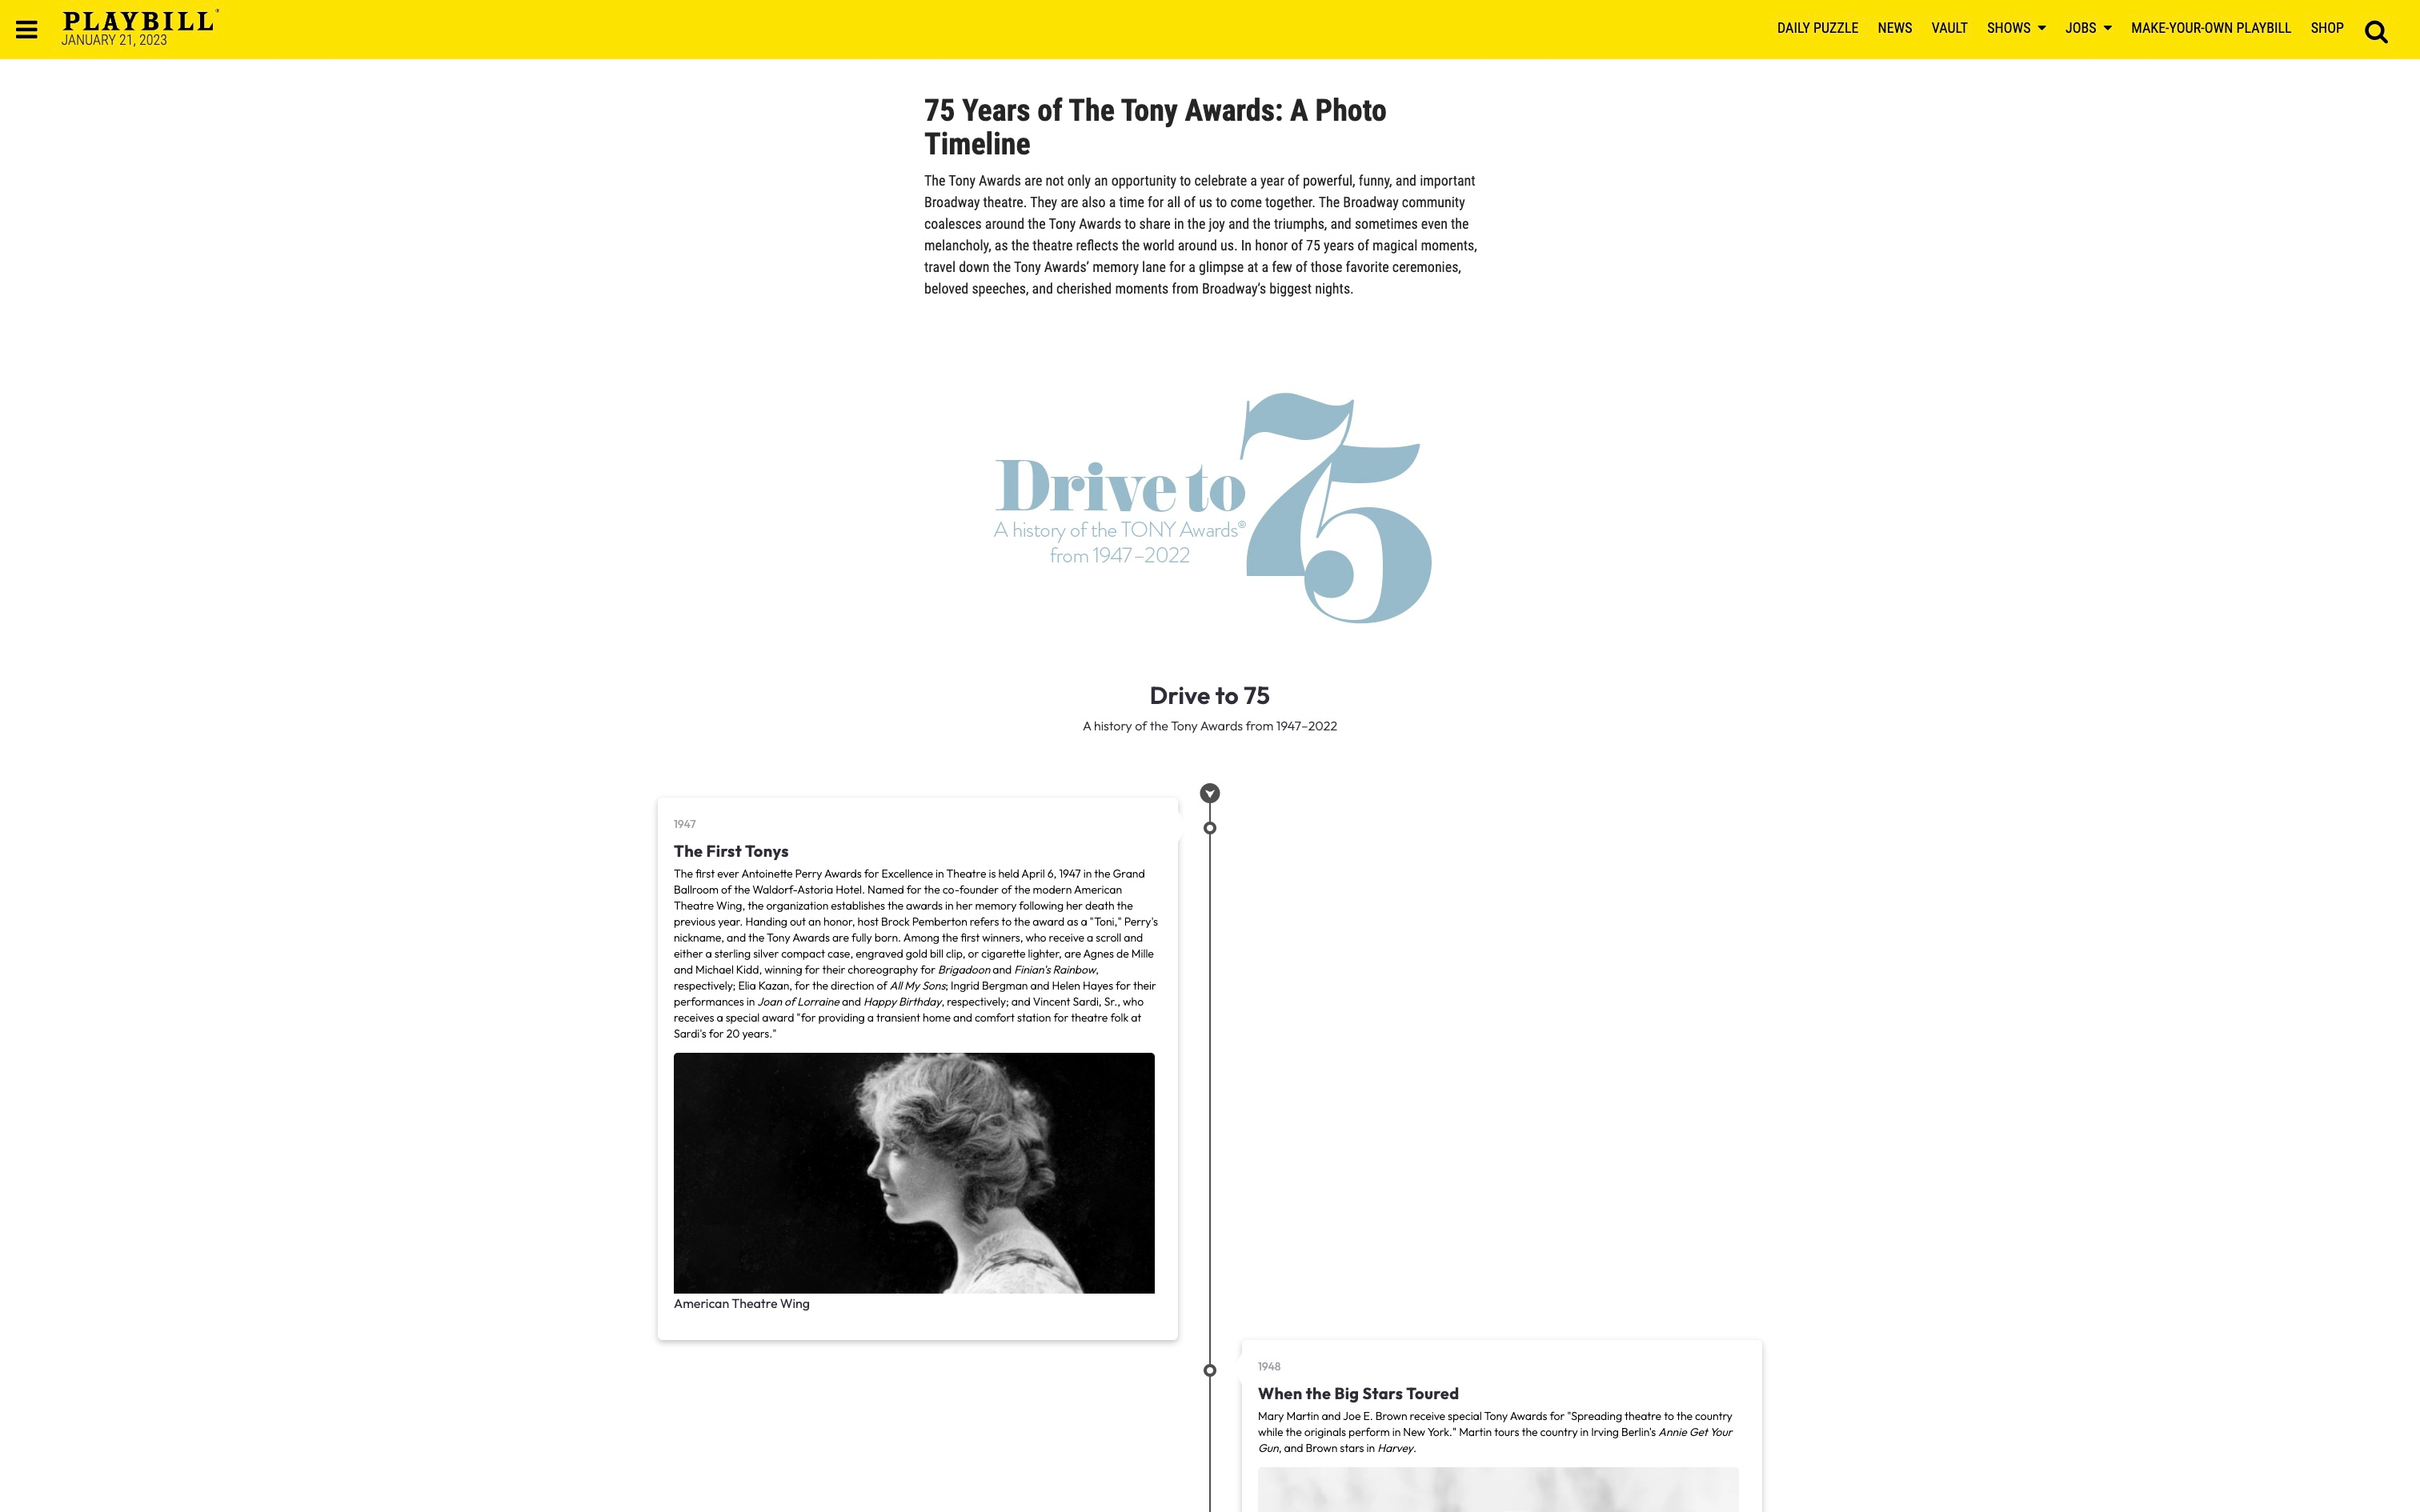 Playbill publish first timeline